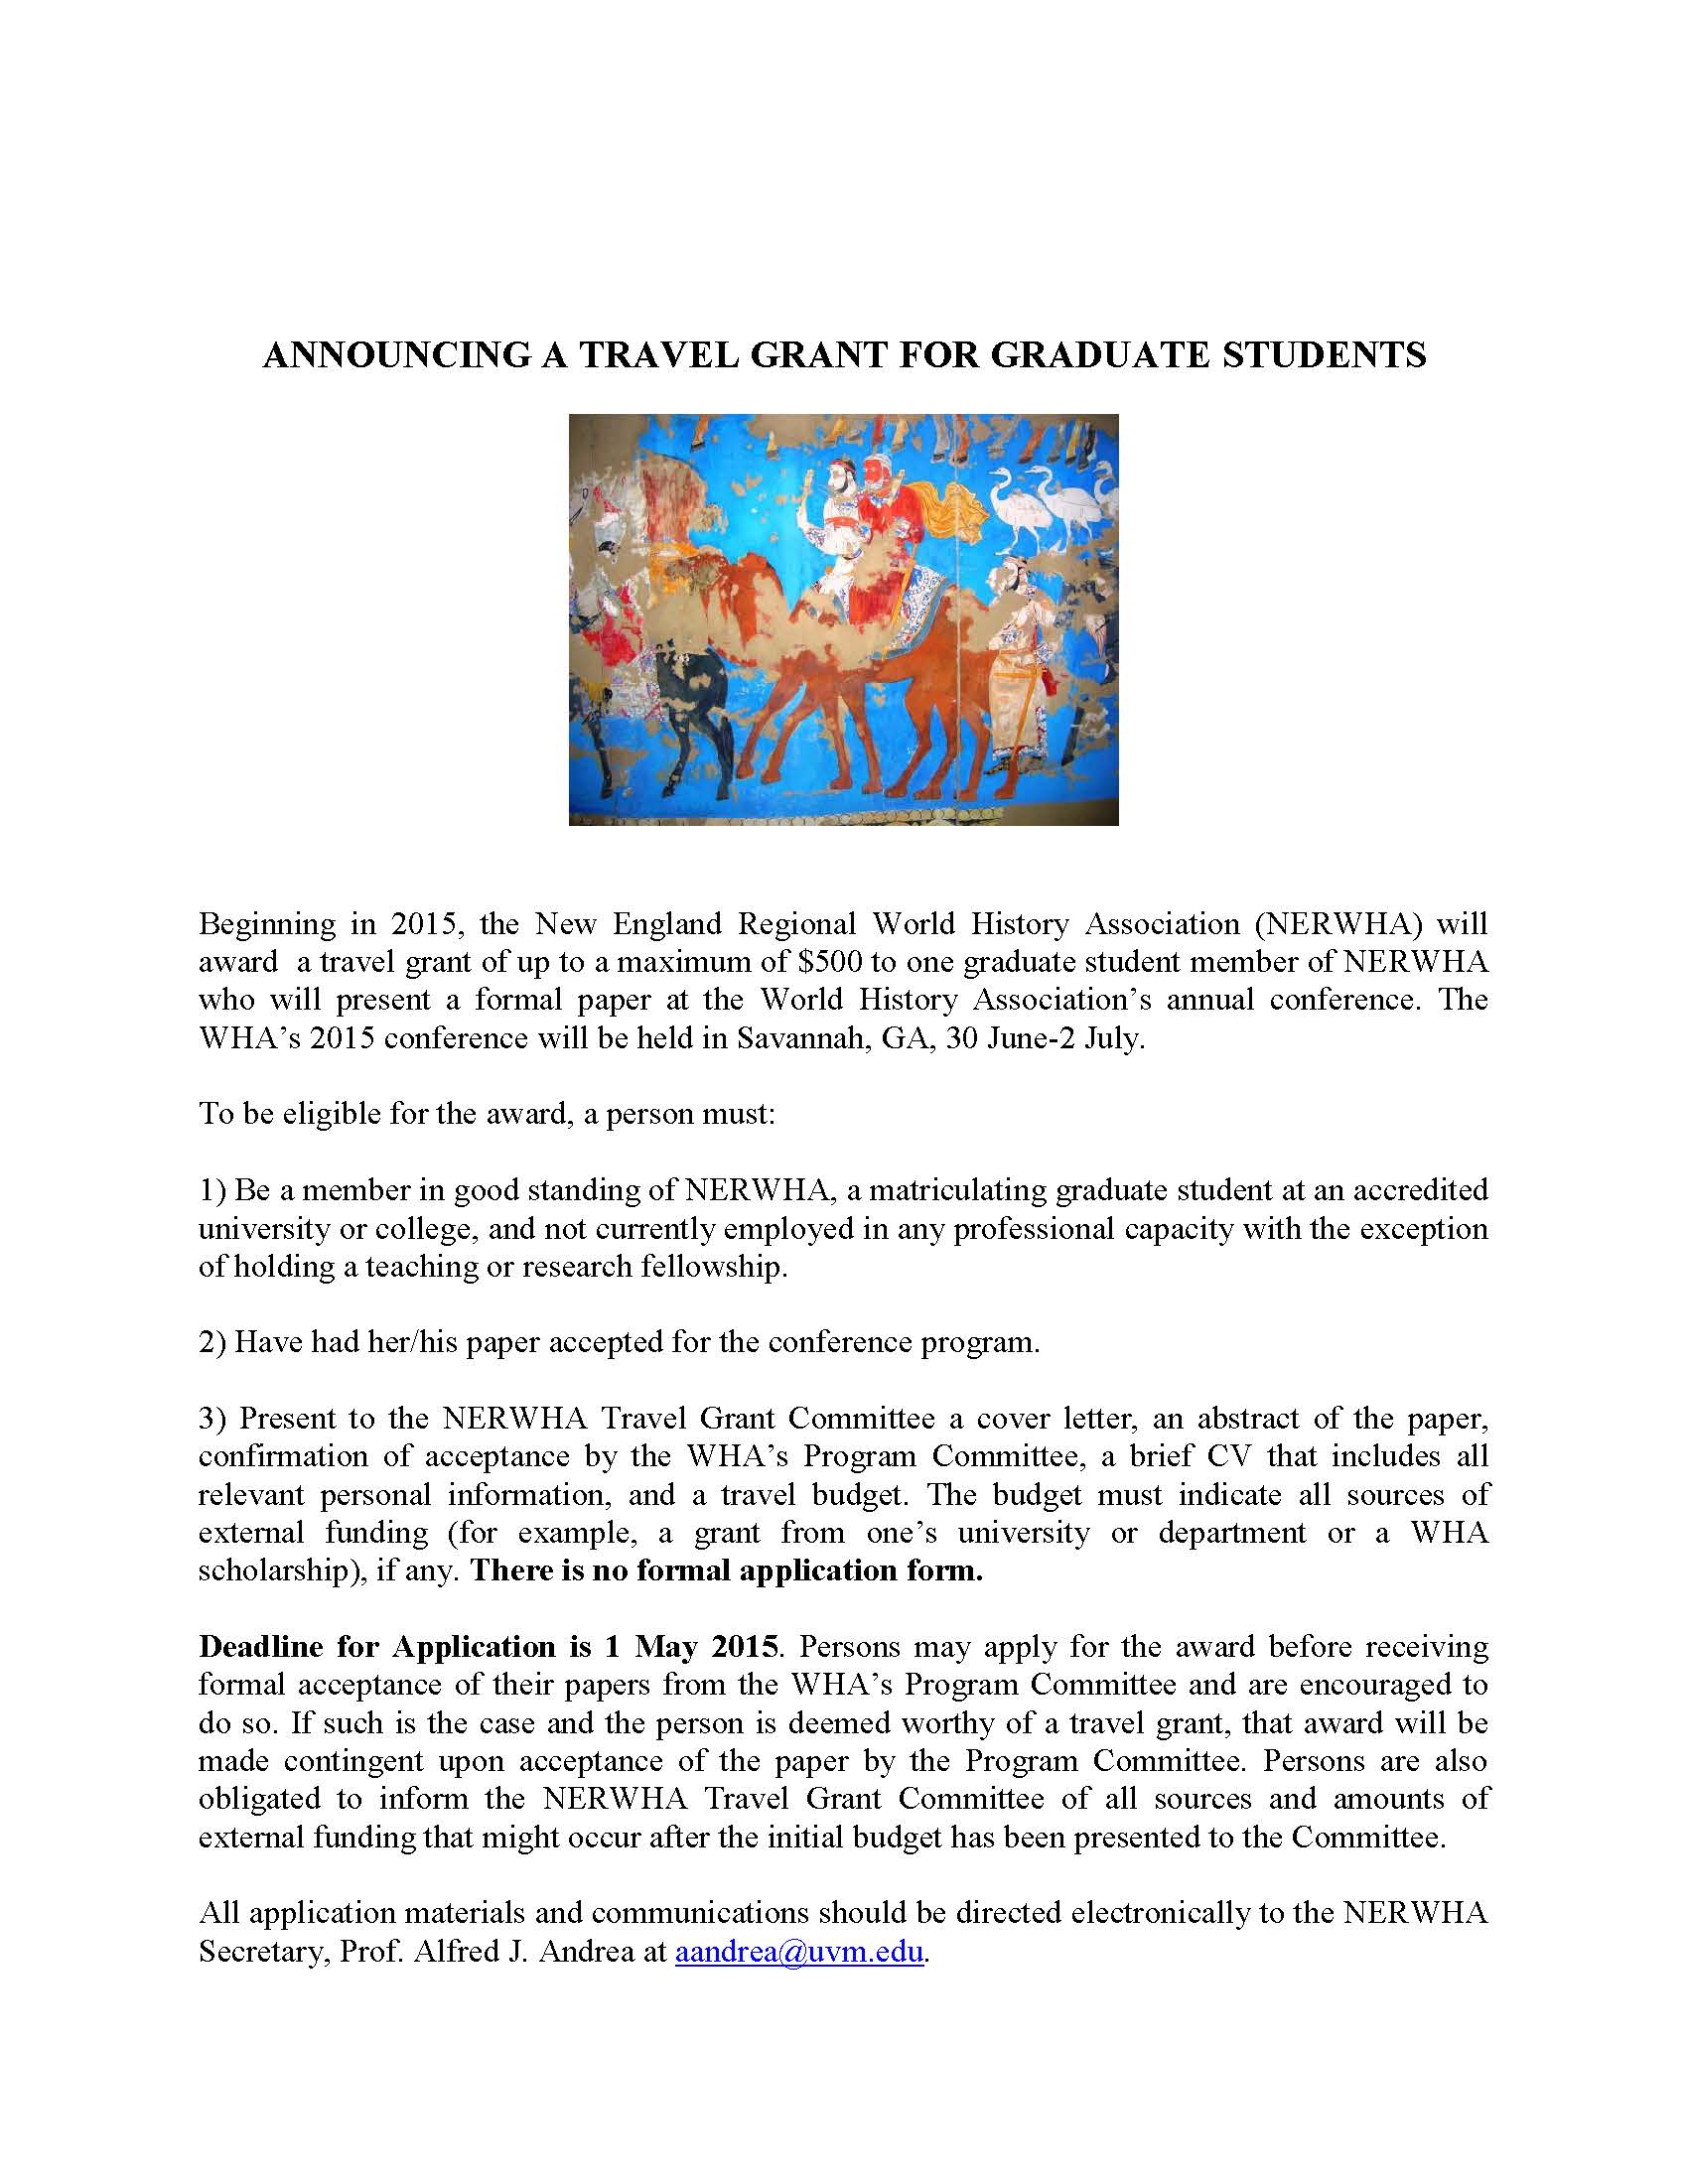 csir travel grant for phd students